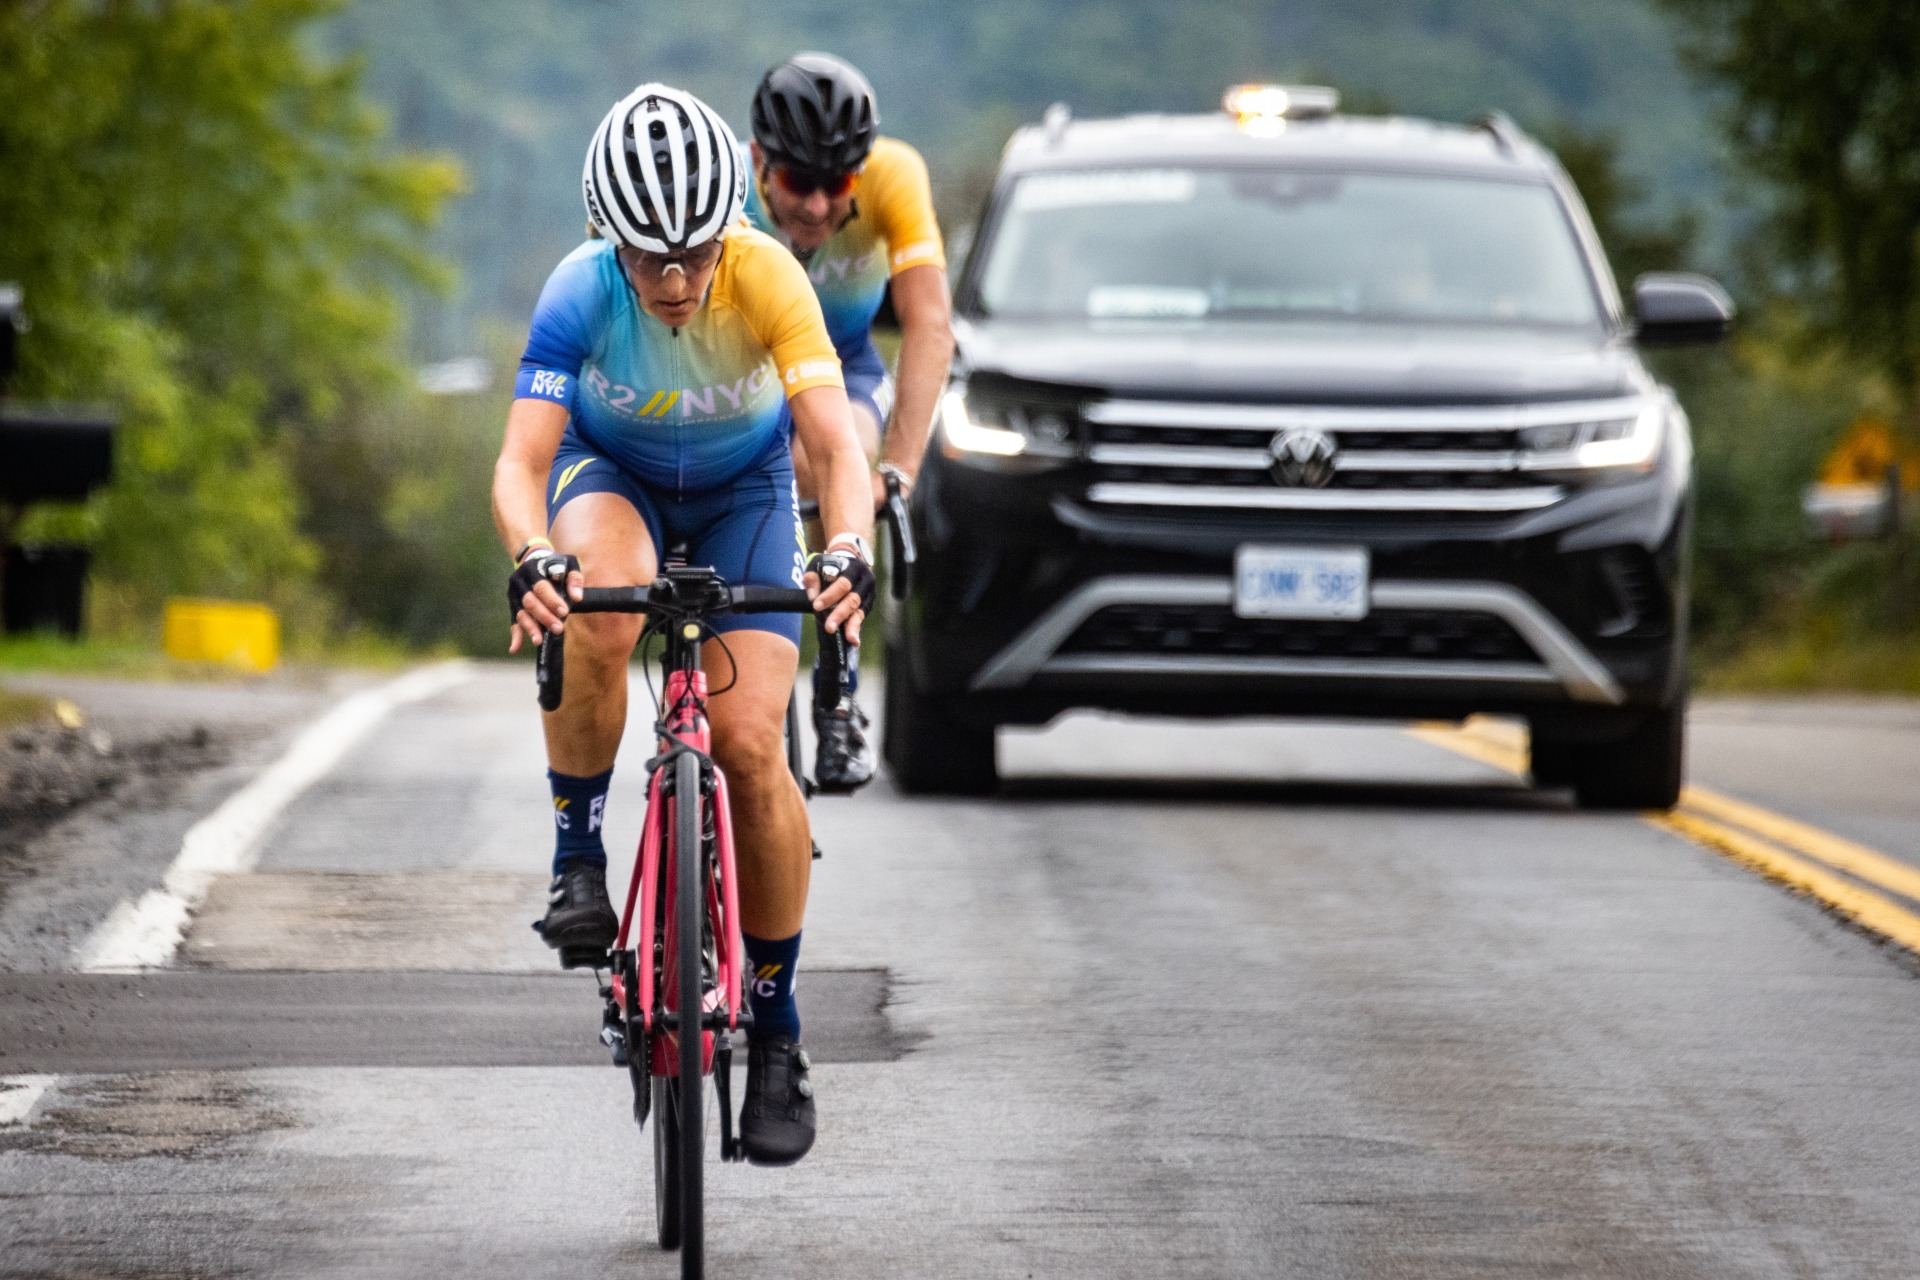 two cyclists riding in front of Volkswagen support car